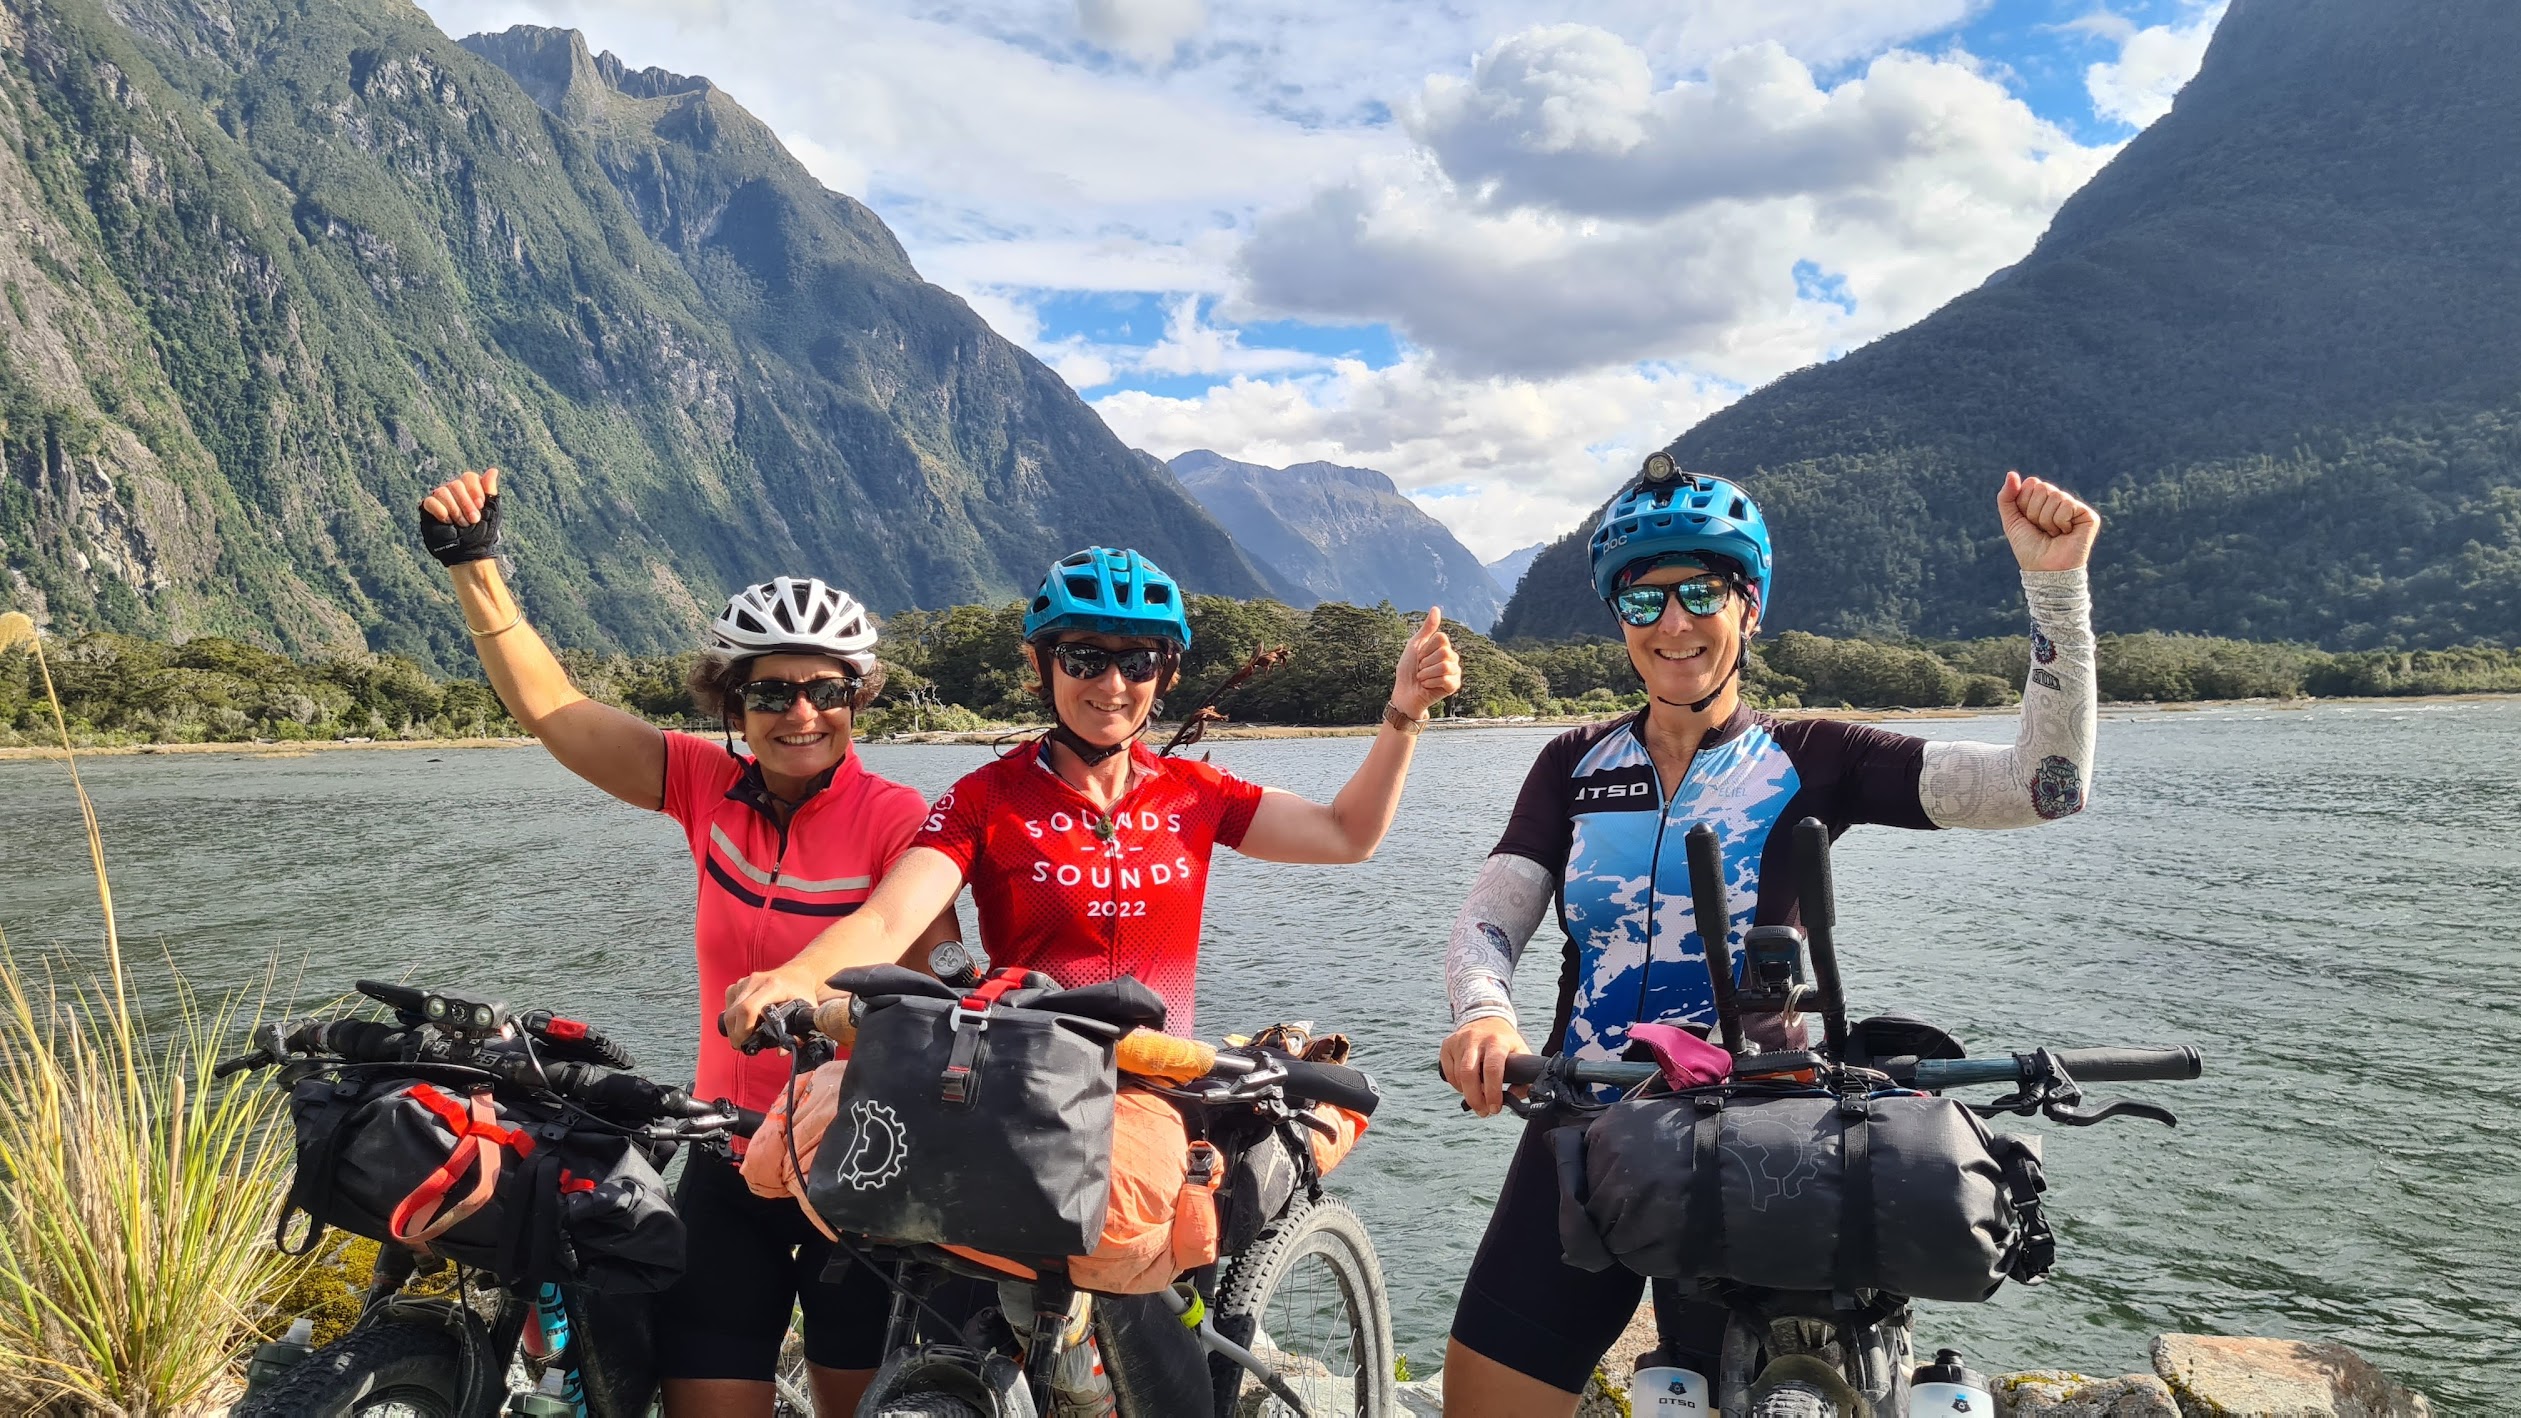 Hana Black reflects on the Sounds2Sounds bikepacking event in New Zealand where she rode her Otso Cycles Fenrir Stainless.